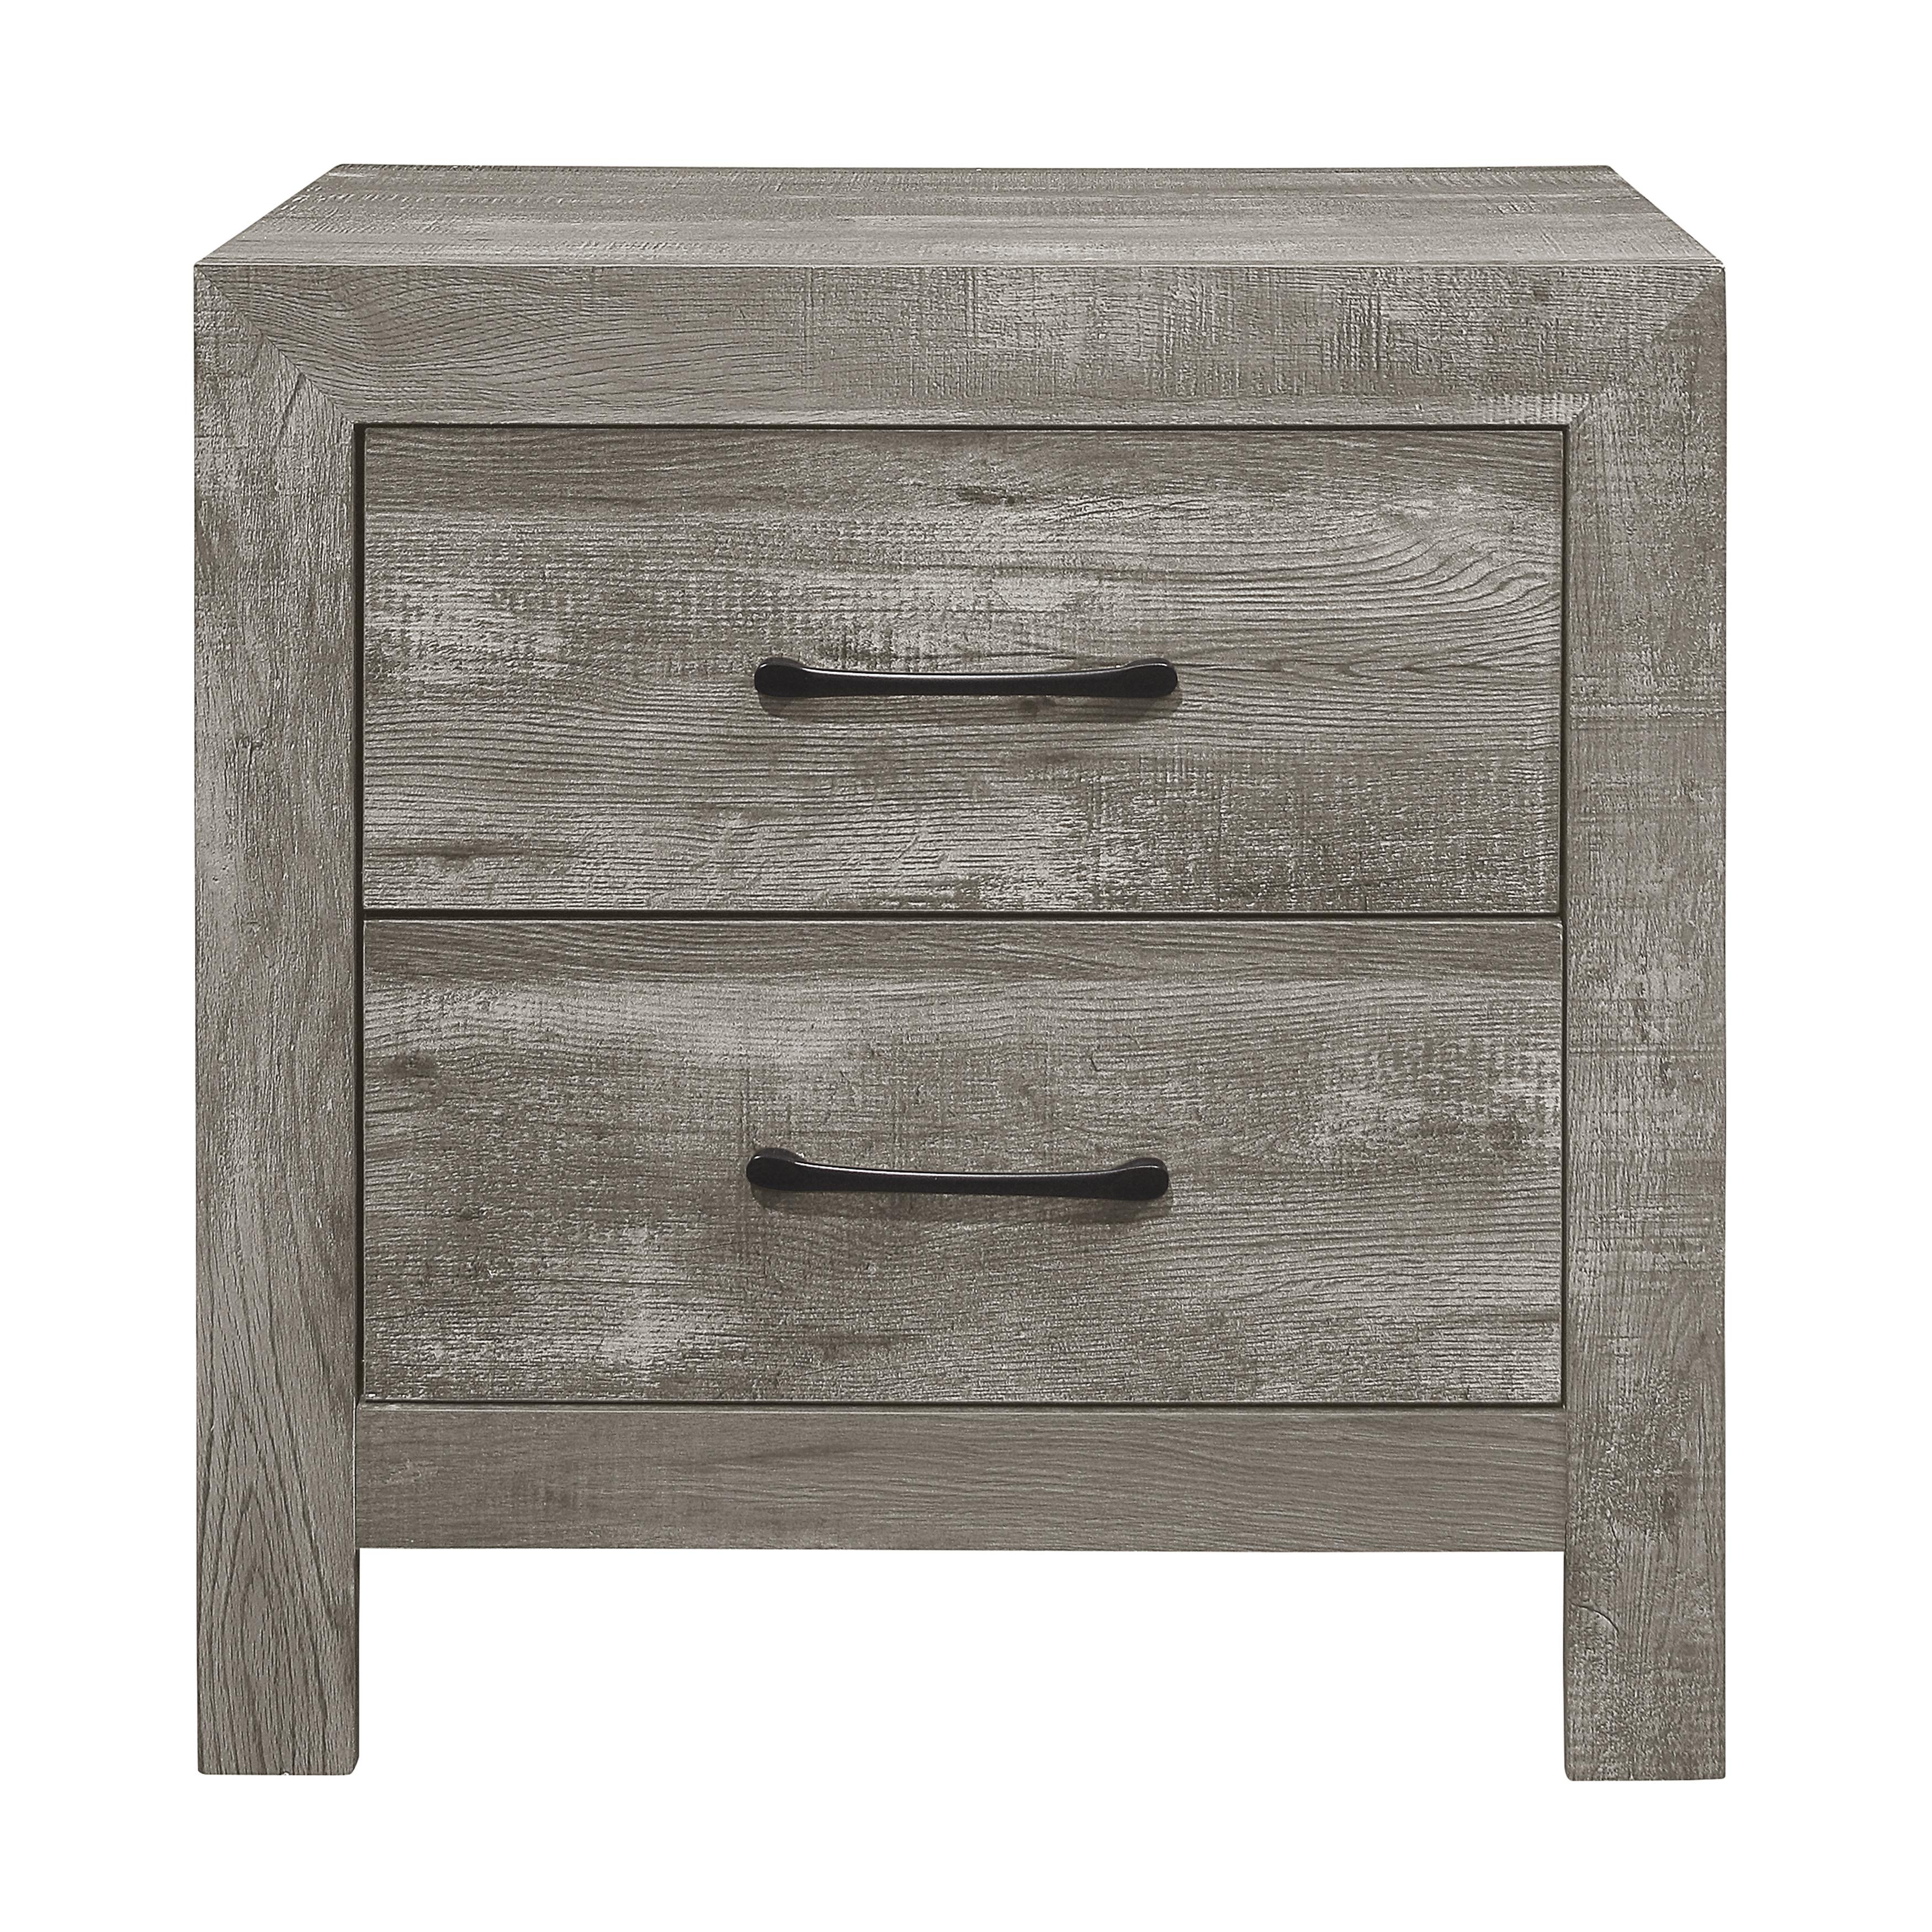 Rustic Nightstand 1534GY-4 Corbin 1534GY-4 in Gray 